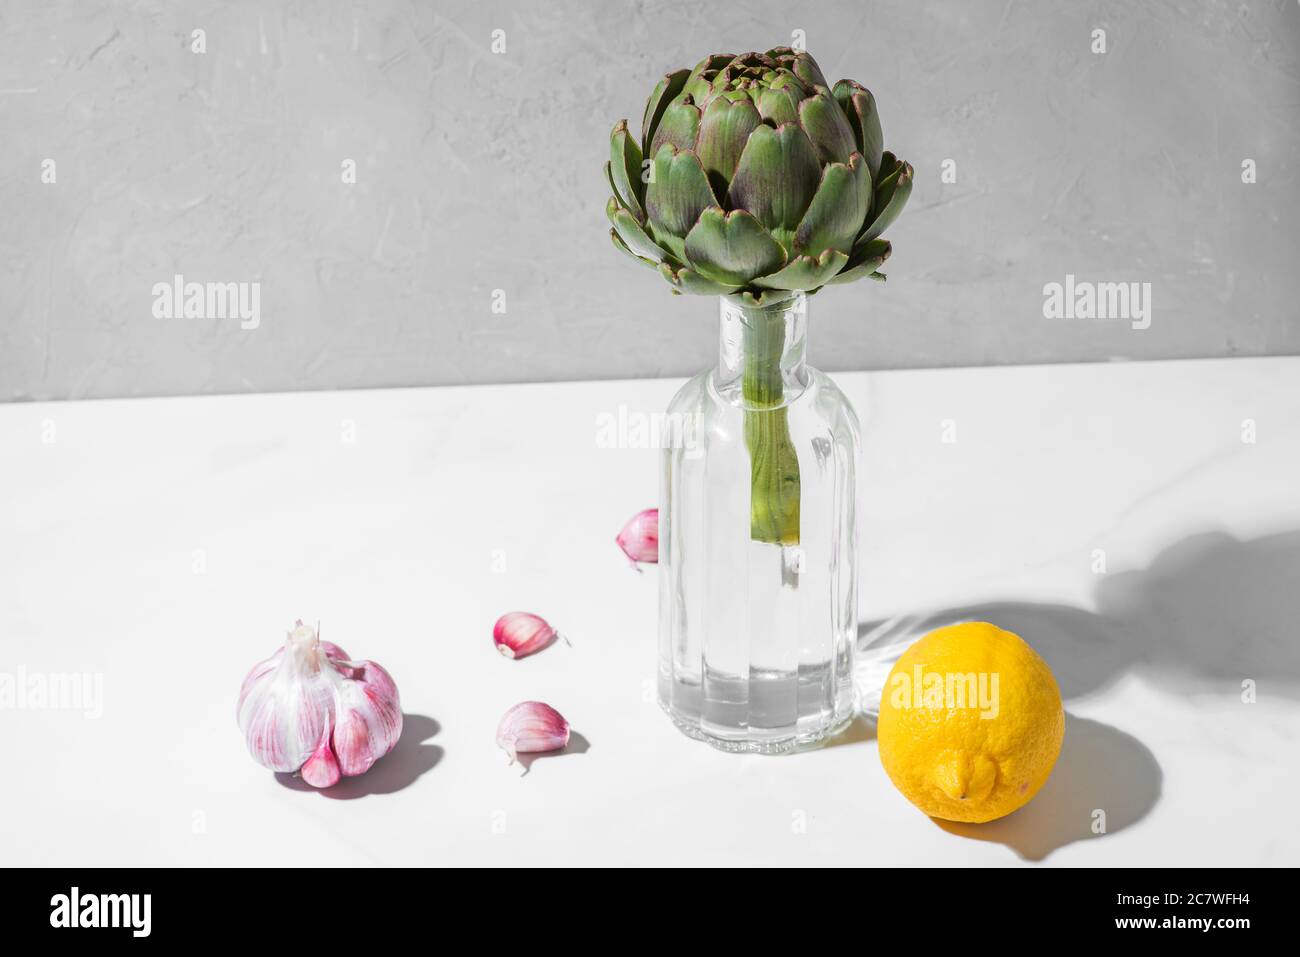 Modern minimal food still life. Artichoke in a bottle with lemon and garlic on white background. Minimal concept Stock Photo